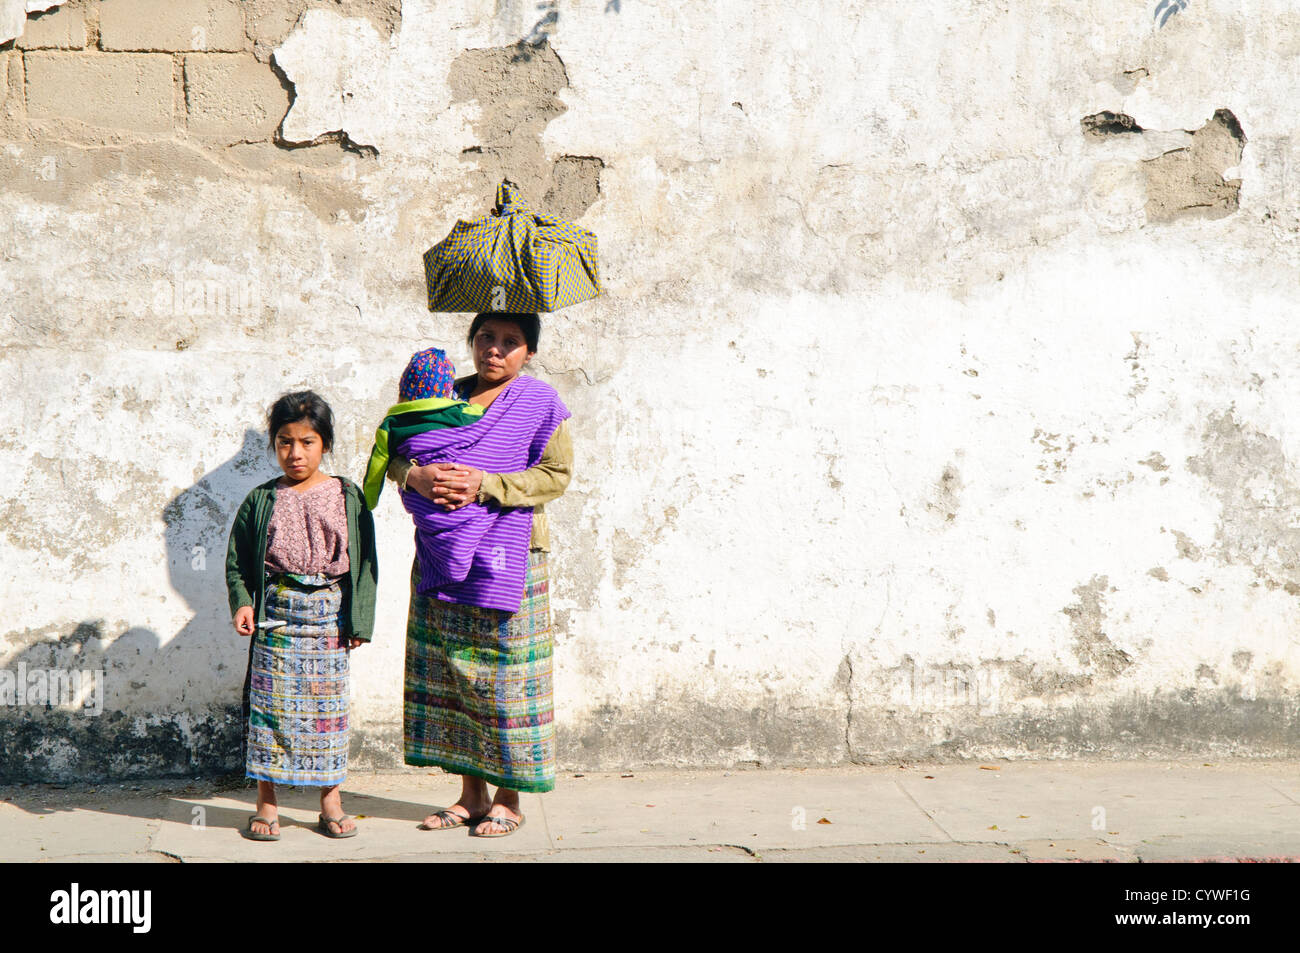 A Guatemalan woman poses with her daughter and baby on a street in Antigua, Guatemala. Stock Photo